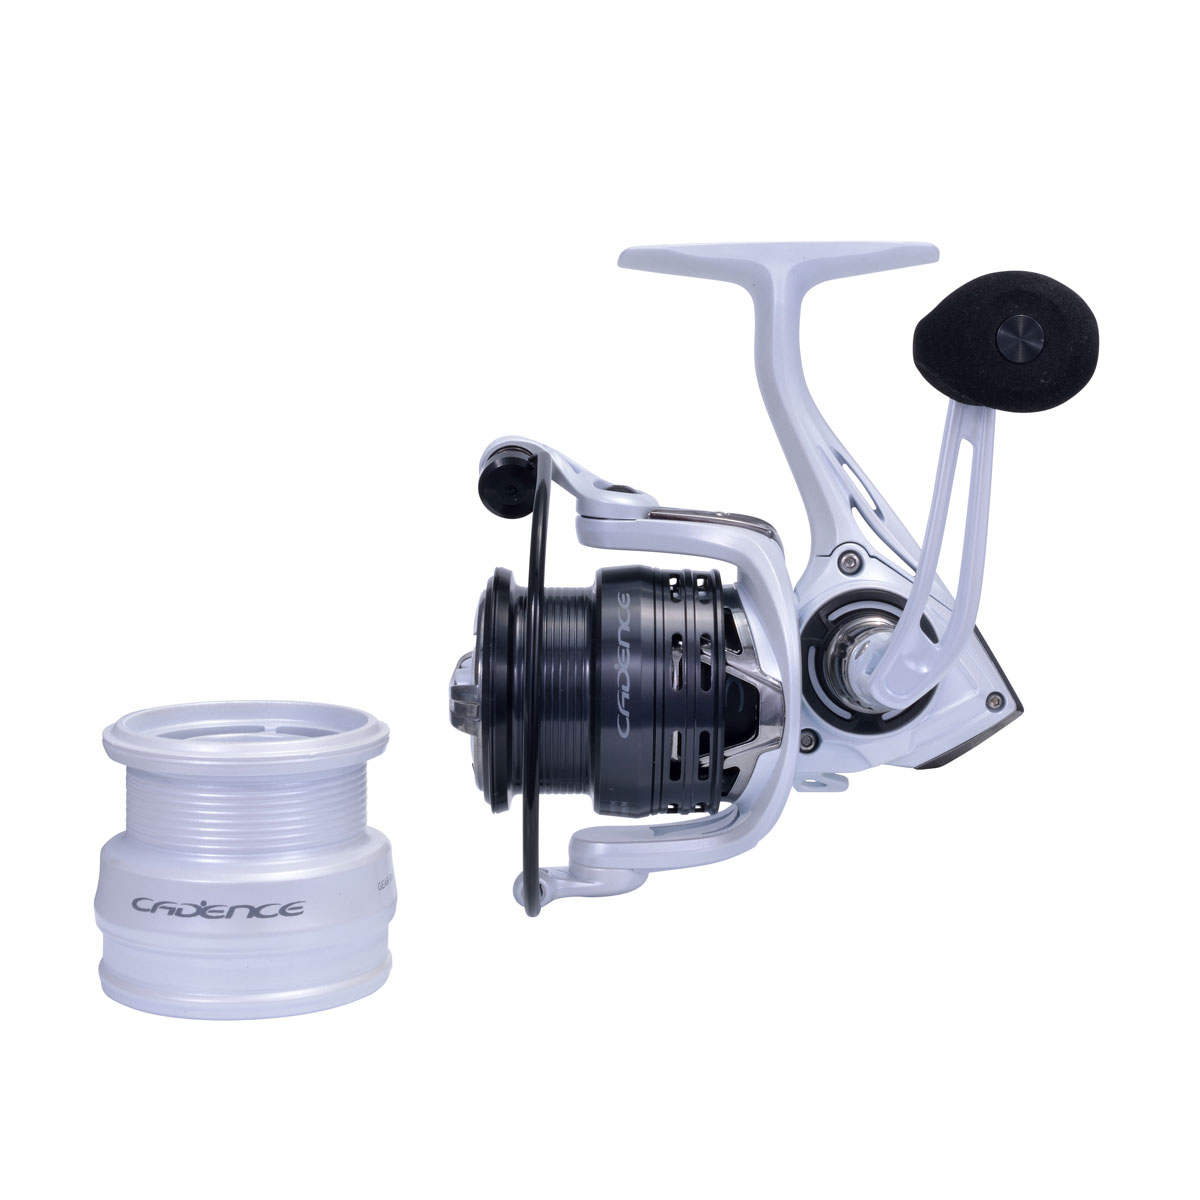 Cadence CC4 Spinning Combo Lightweight with 24-Ton Macao